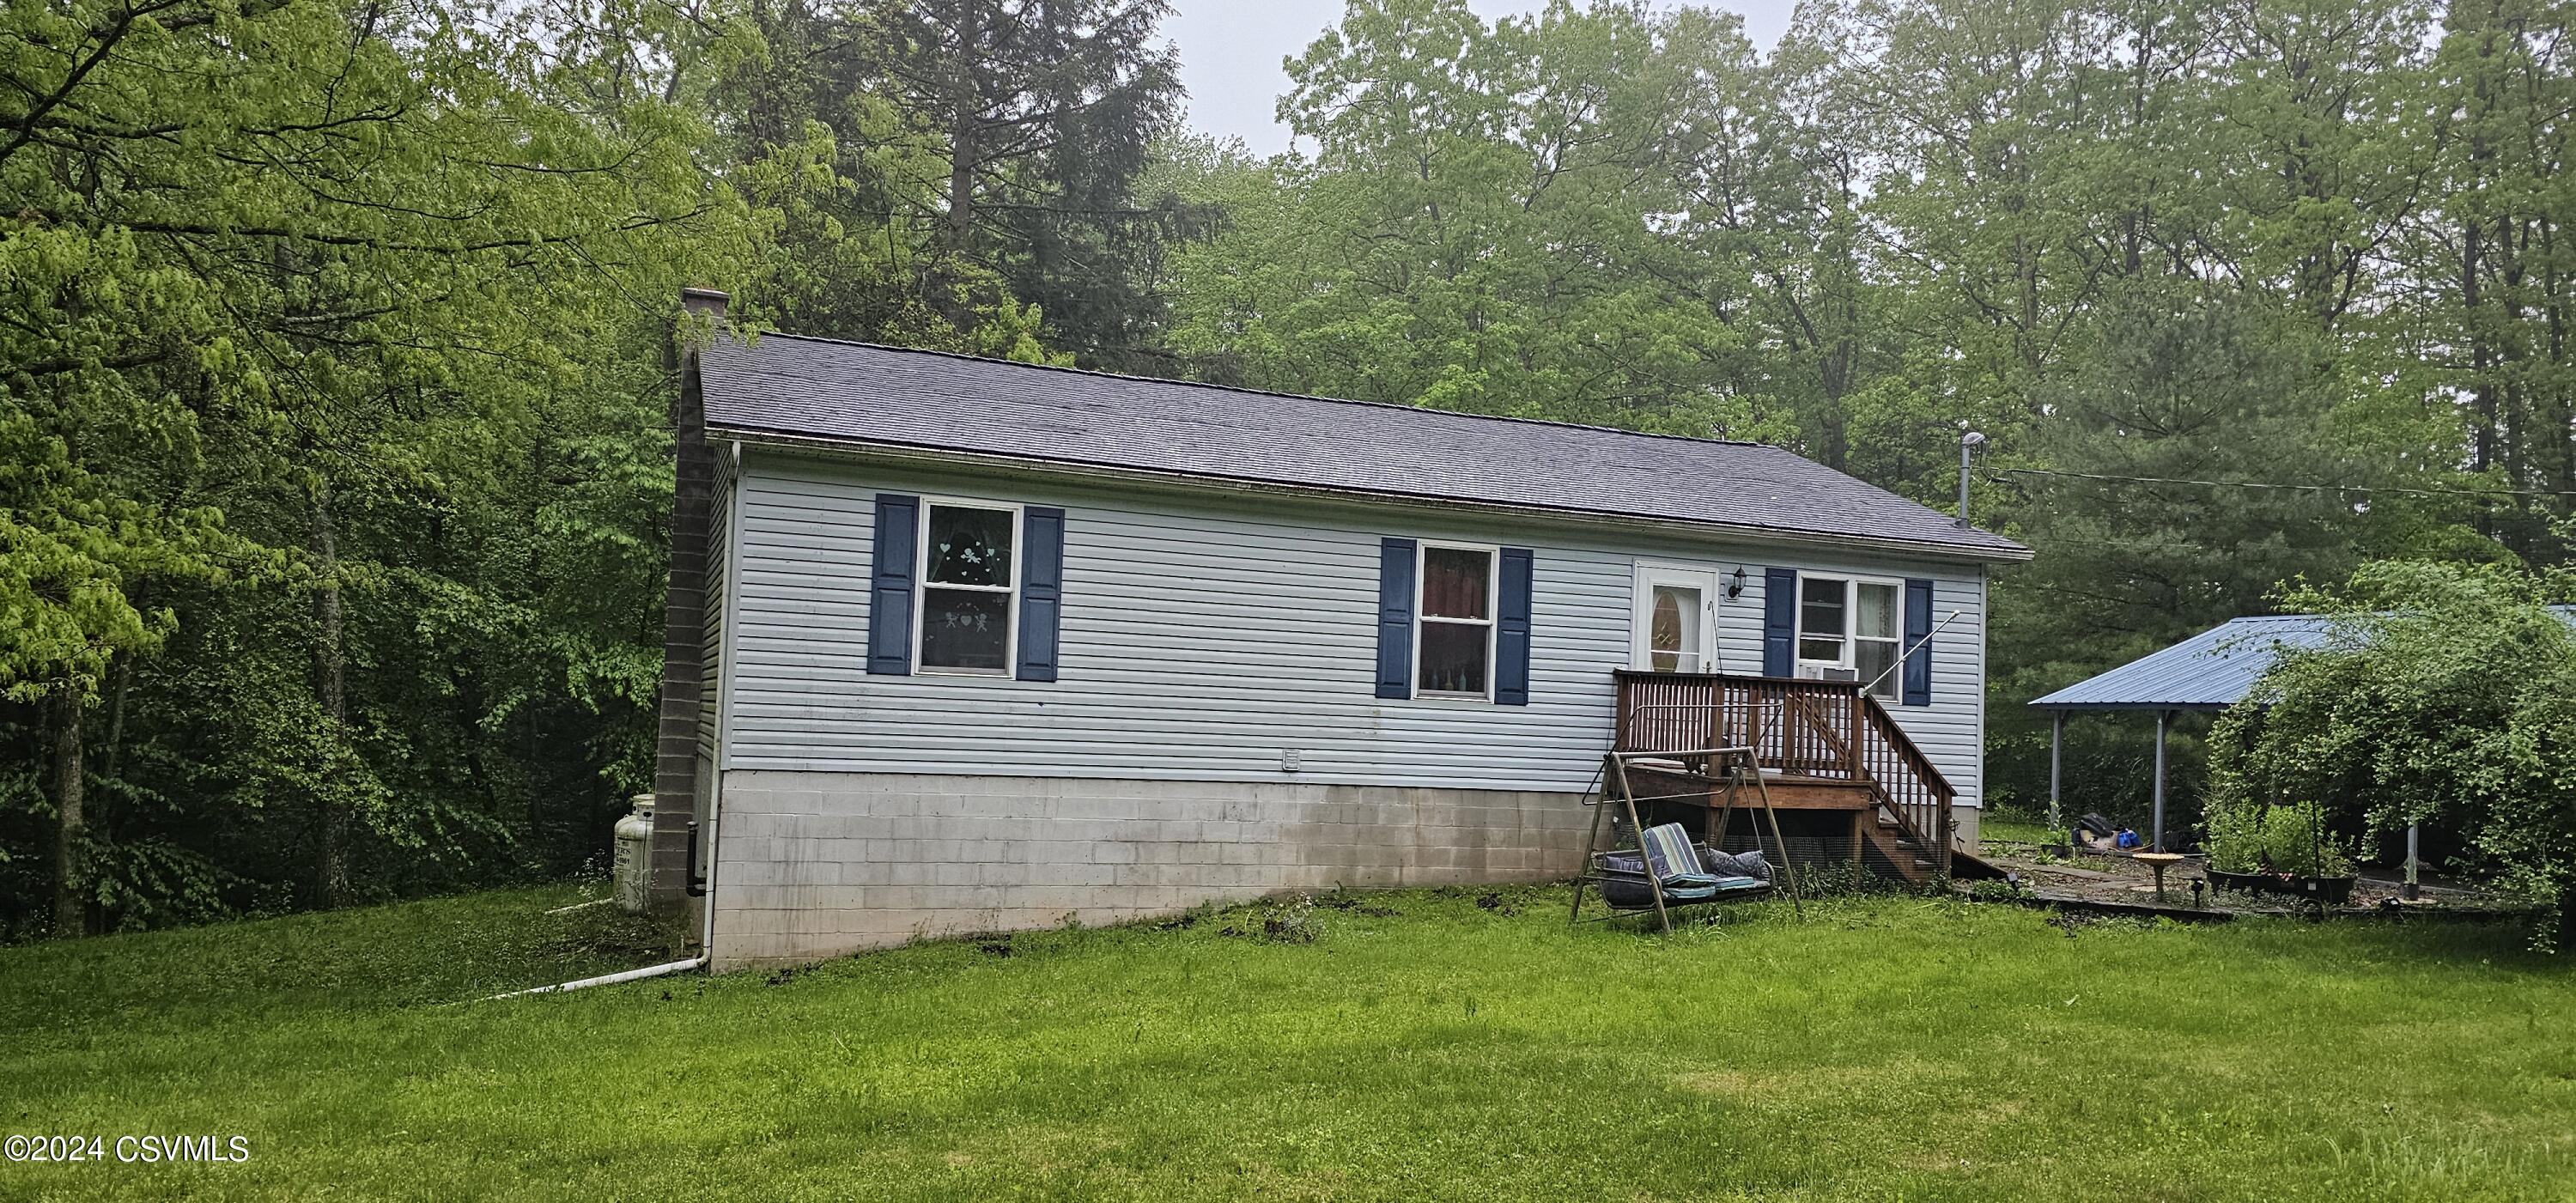 Property: 78 Swamp Road,Middleburg, PA